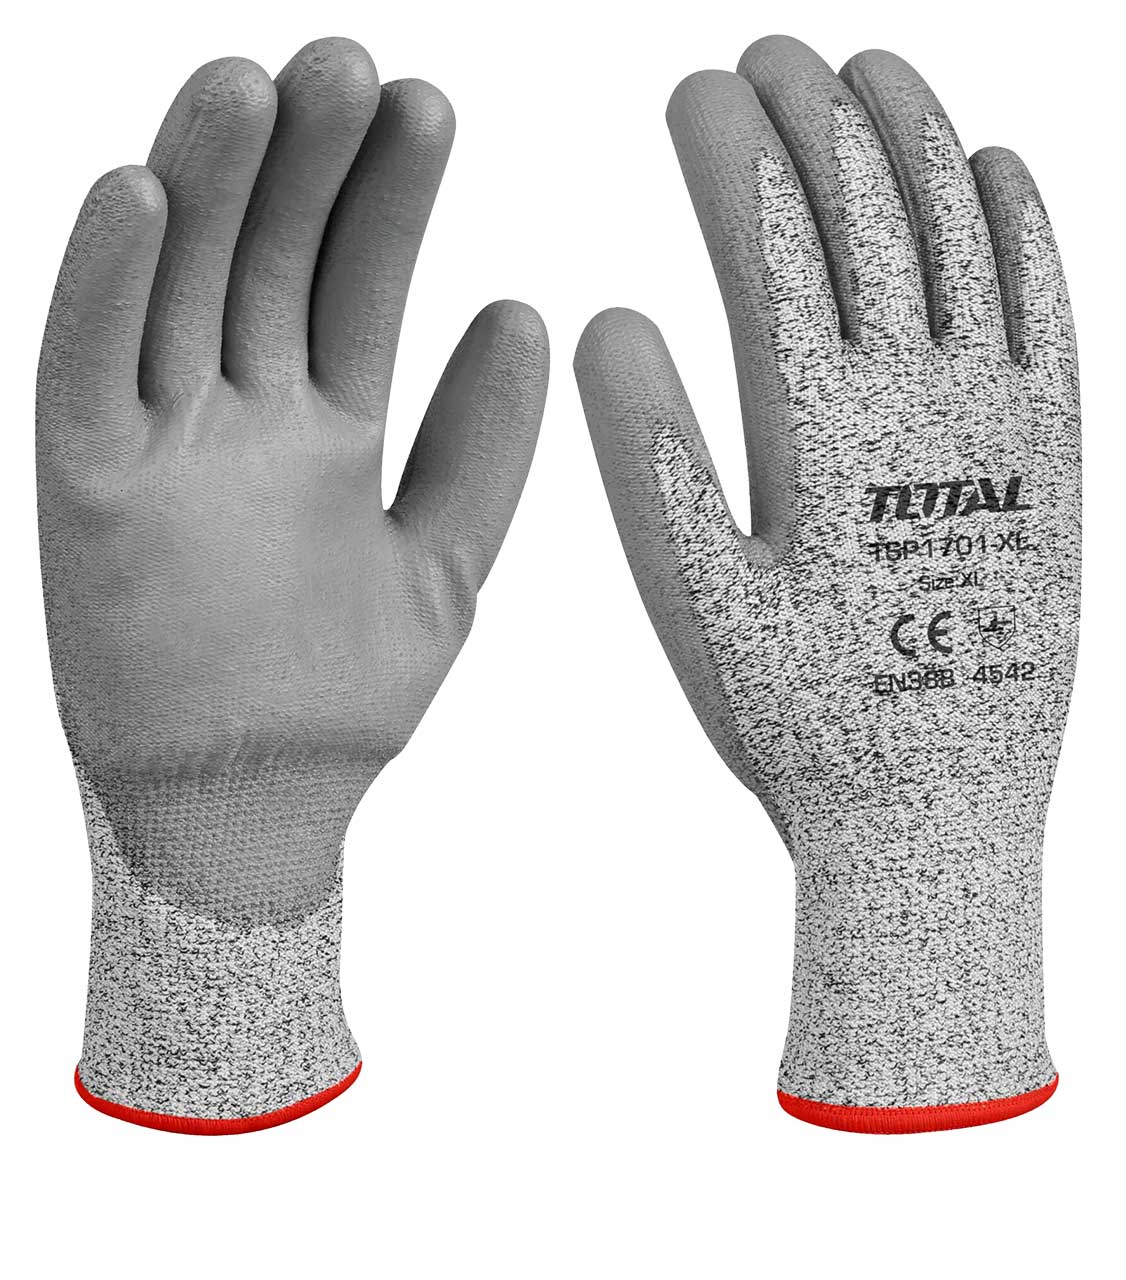 Total Cut-Resistant Gloves - TSP1701-XL | Supply Master | Accra, Ghana Tools Building Steel Engineering Hardware tool